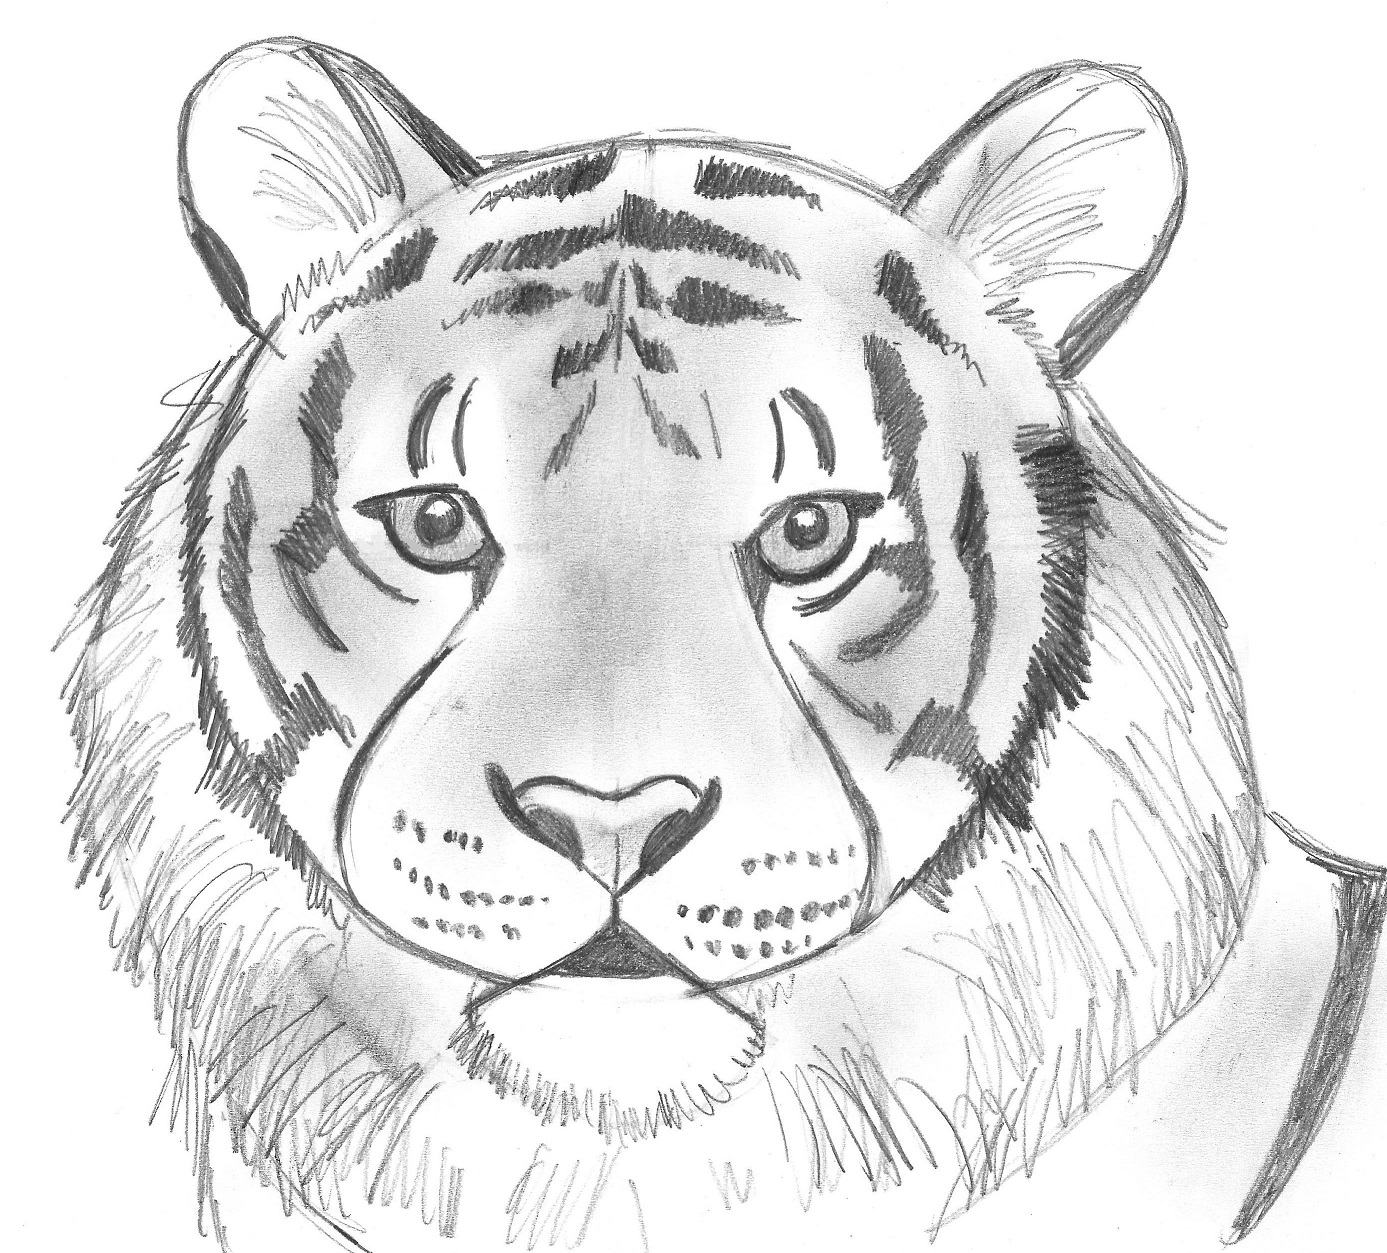 Draw 25 Wild Animals (Even If You Don't Know How to Draw!) - Art Starts